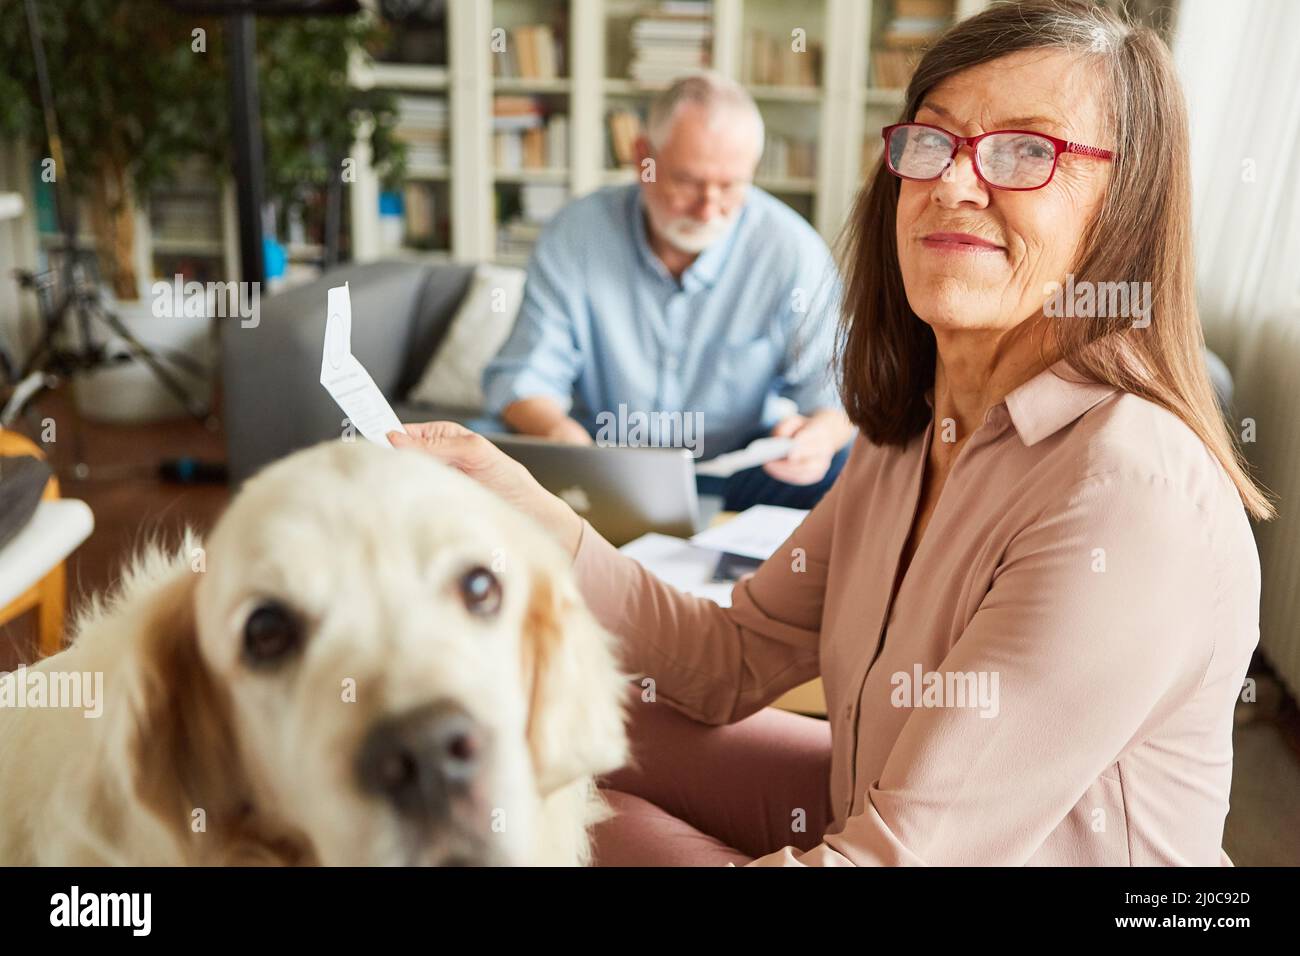 Elderly woman with a receipt doing the tax return with her husband in the background Stock Photo